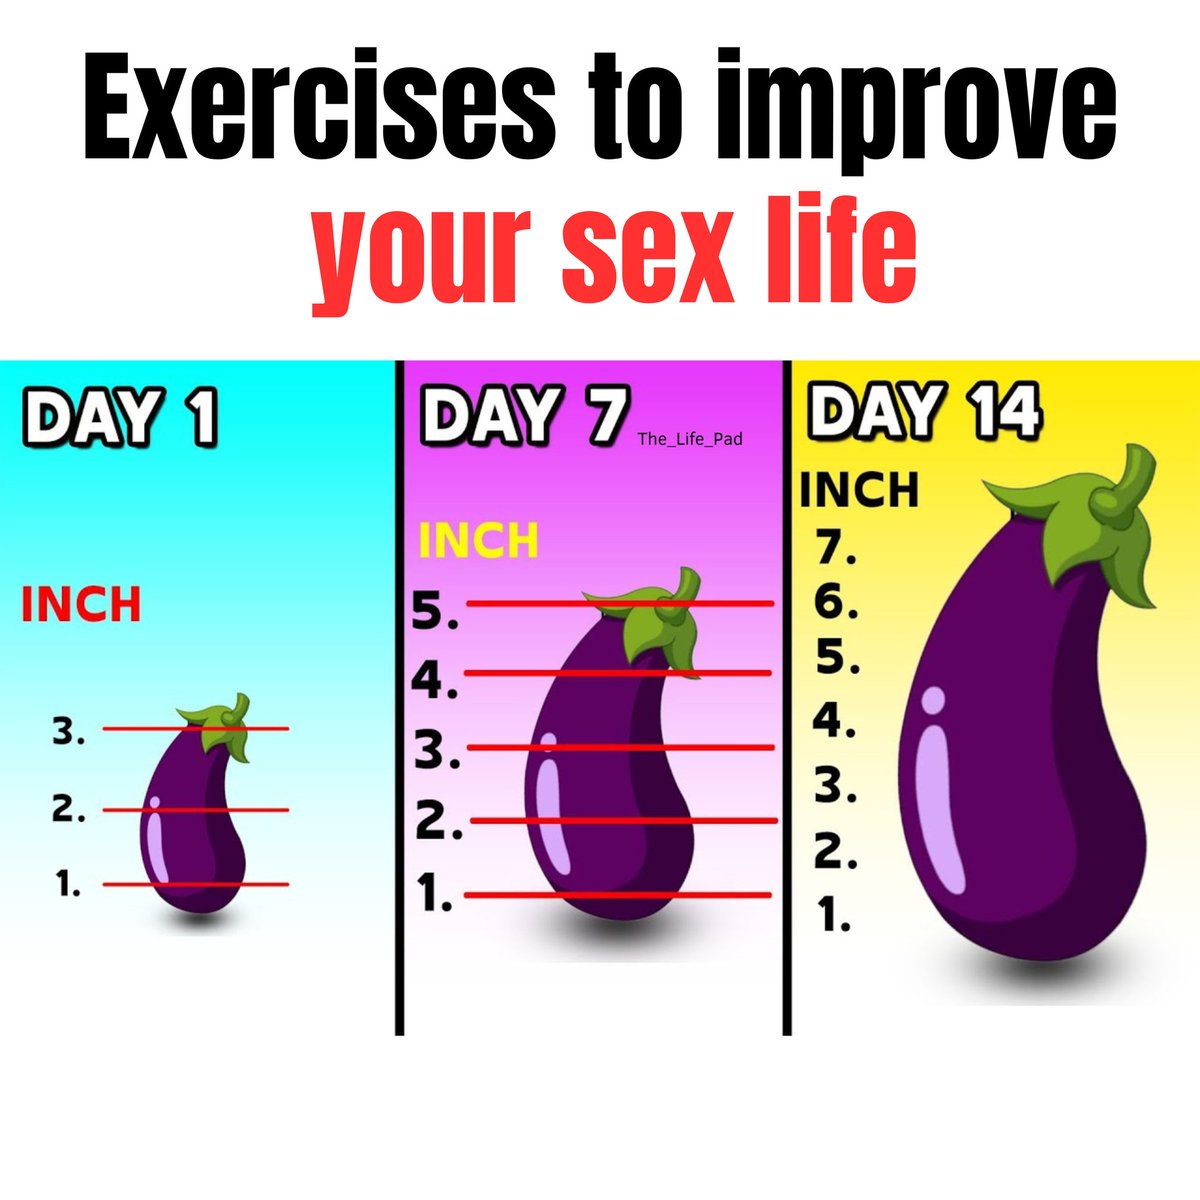 5 Exercises to improve your sex life in 14 days